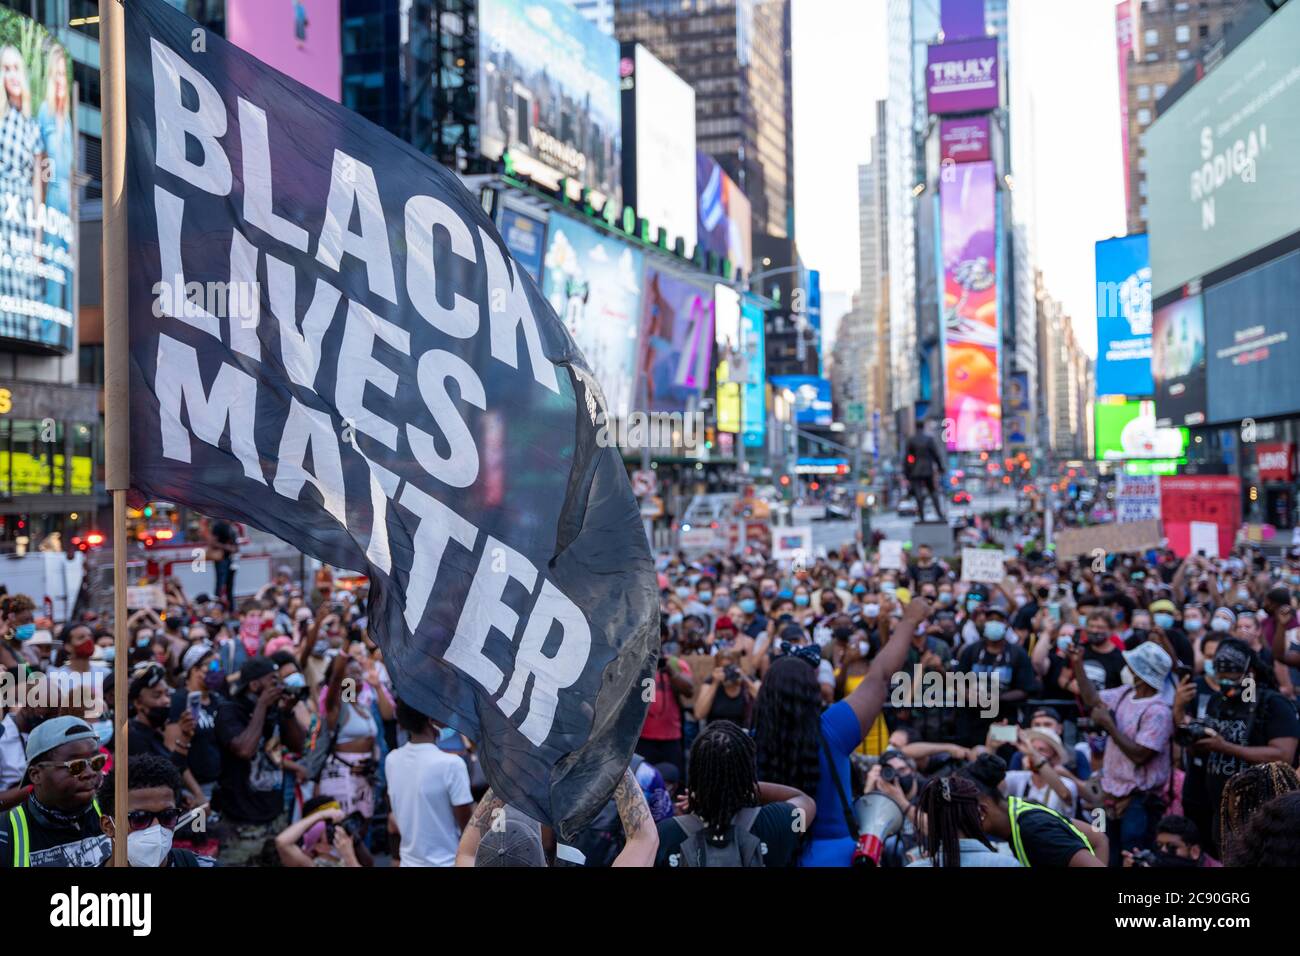 Black Womans/Womxn March Protest - New York City - Black Lives Matter big flag waved in front of nyc protest crowd Stock Photo